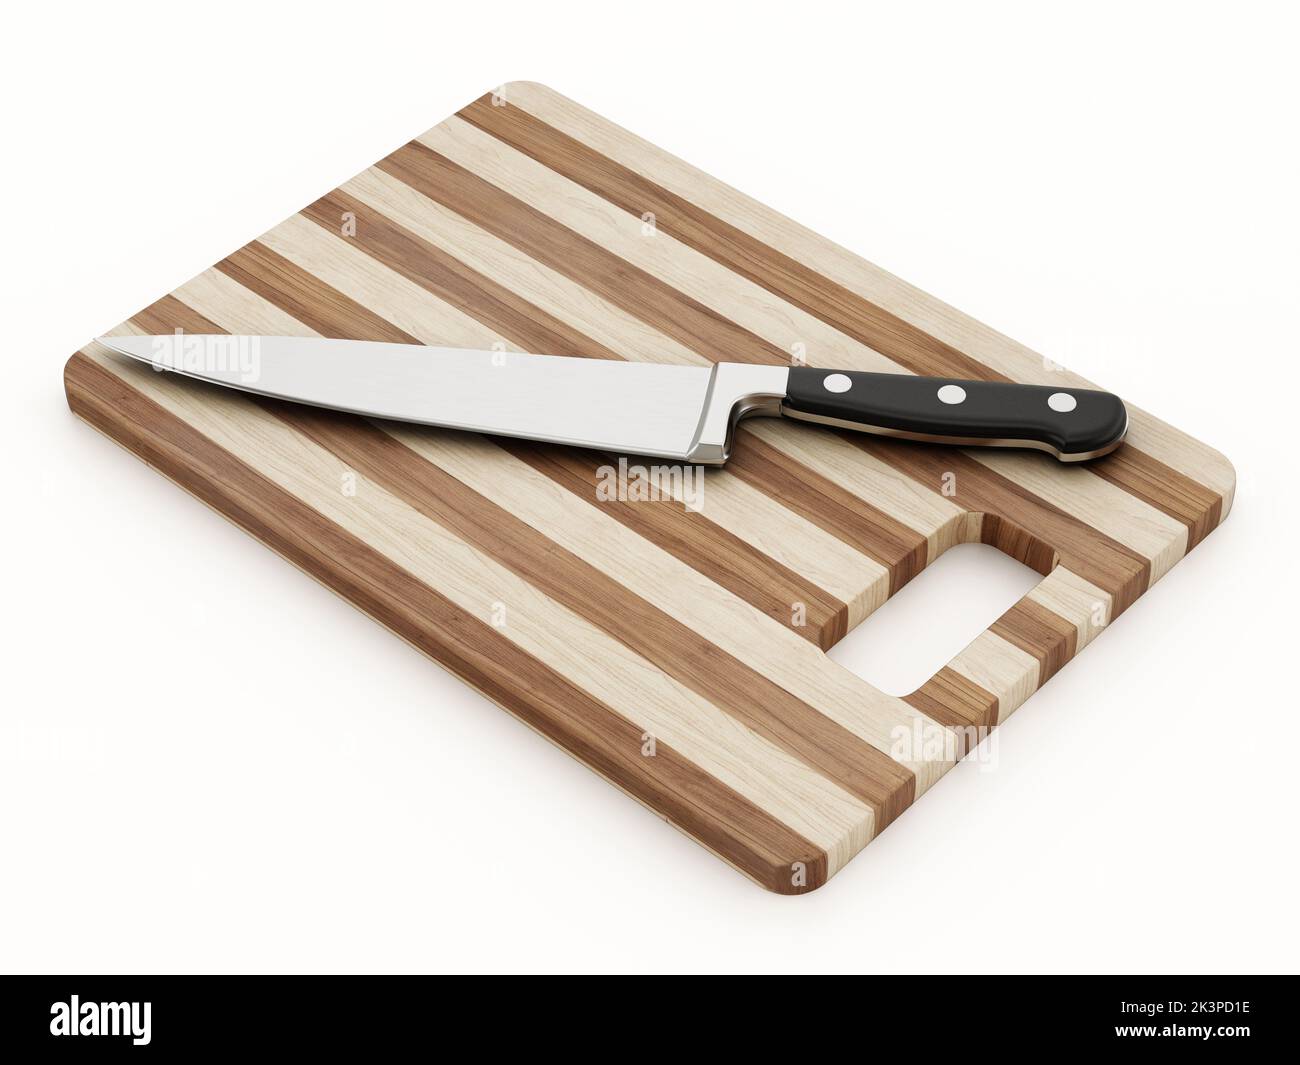 Wooden cutting board and knife isolated on white background. 3D illustration. Stock Photo